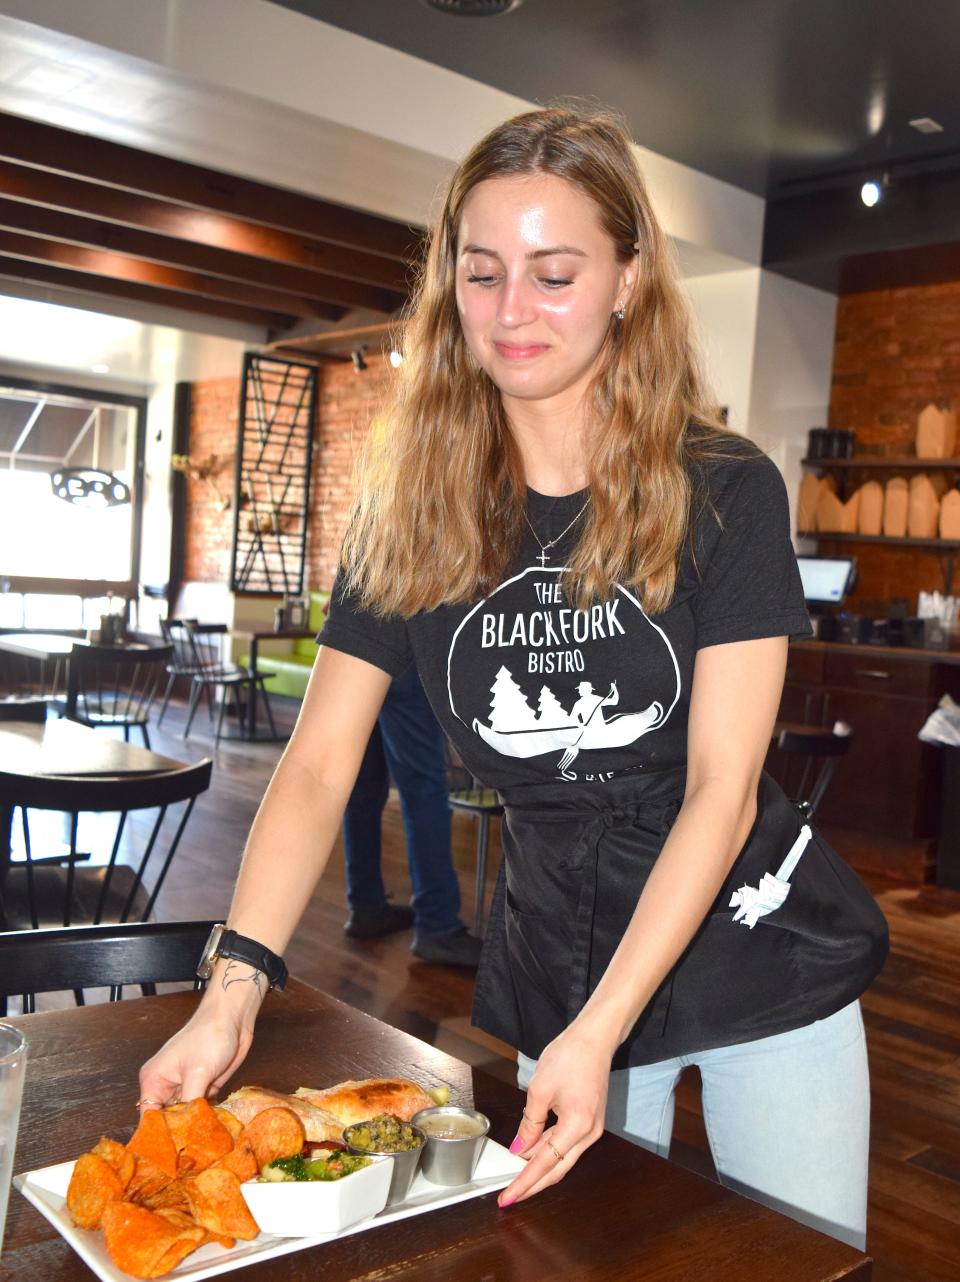 The Firetower burger is one of the more popular choices at Black Forest Bistro. It features onion straws, pepper jack cheese, jalapeno jam and fresh jalapeno and barbecue sauce on a brioche bun. Serenity Atwell serves up a meal at Black Fork.